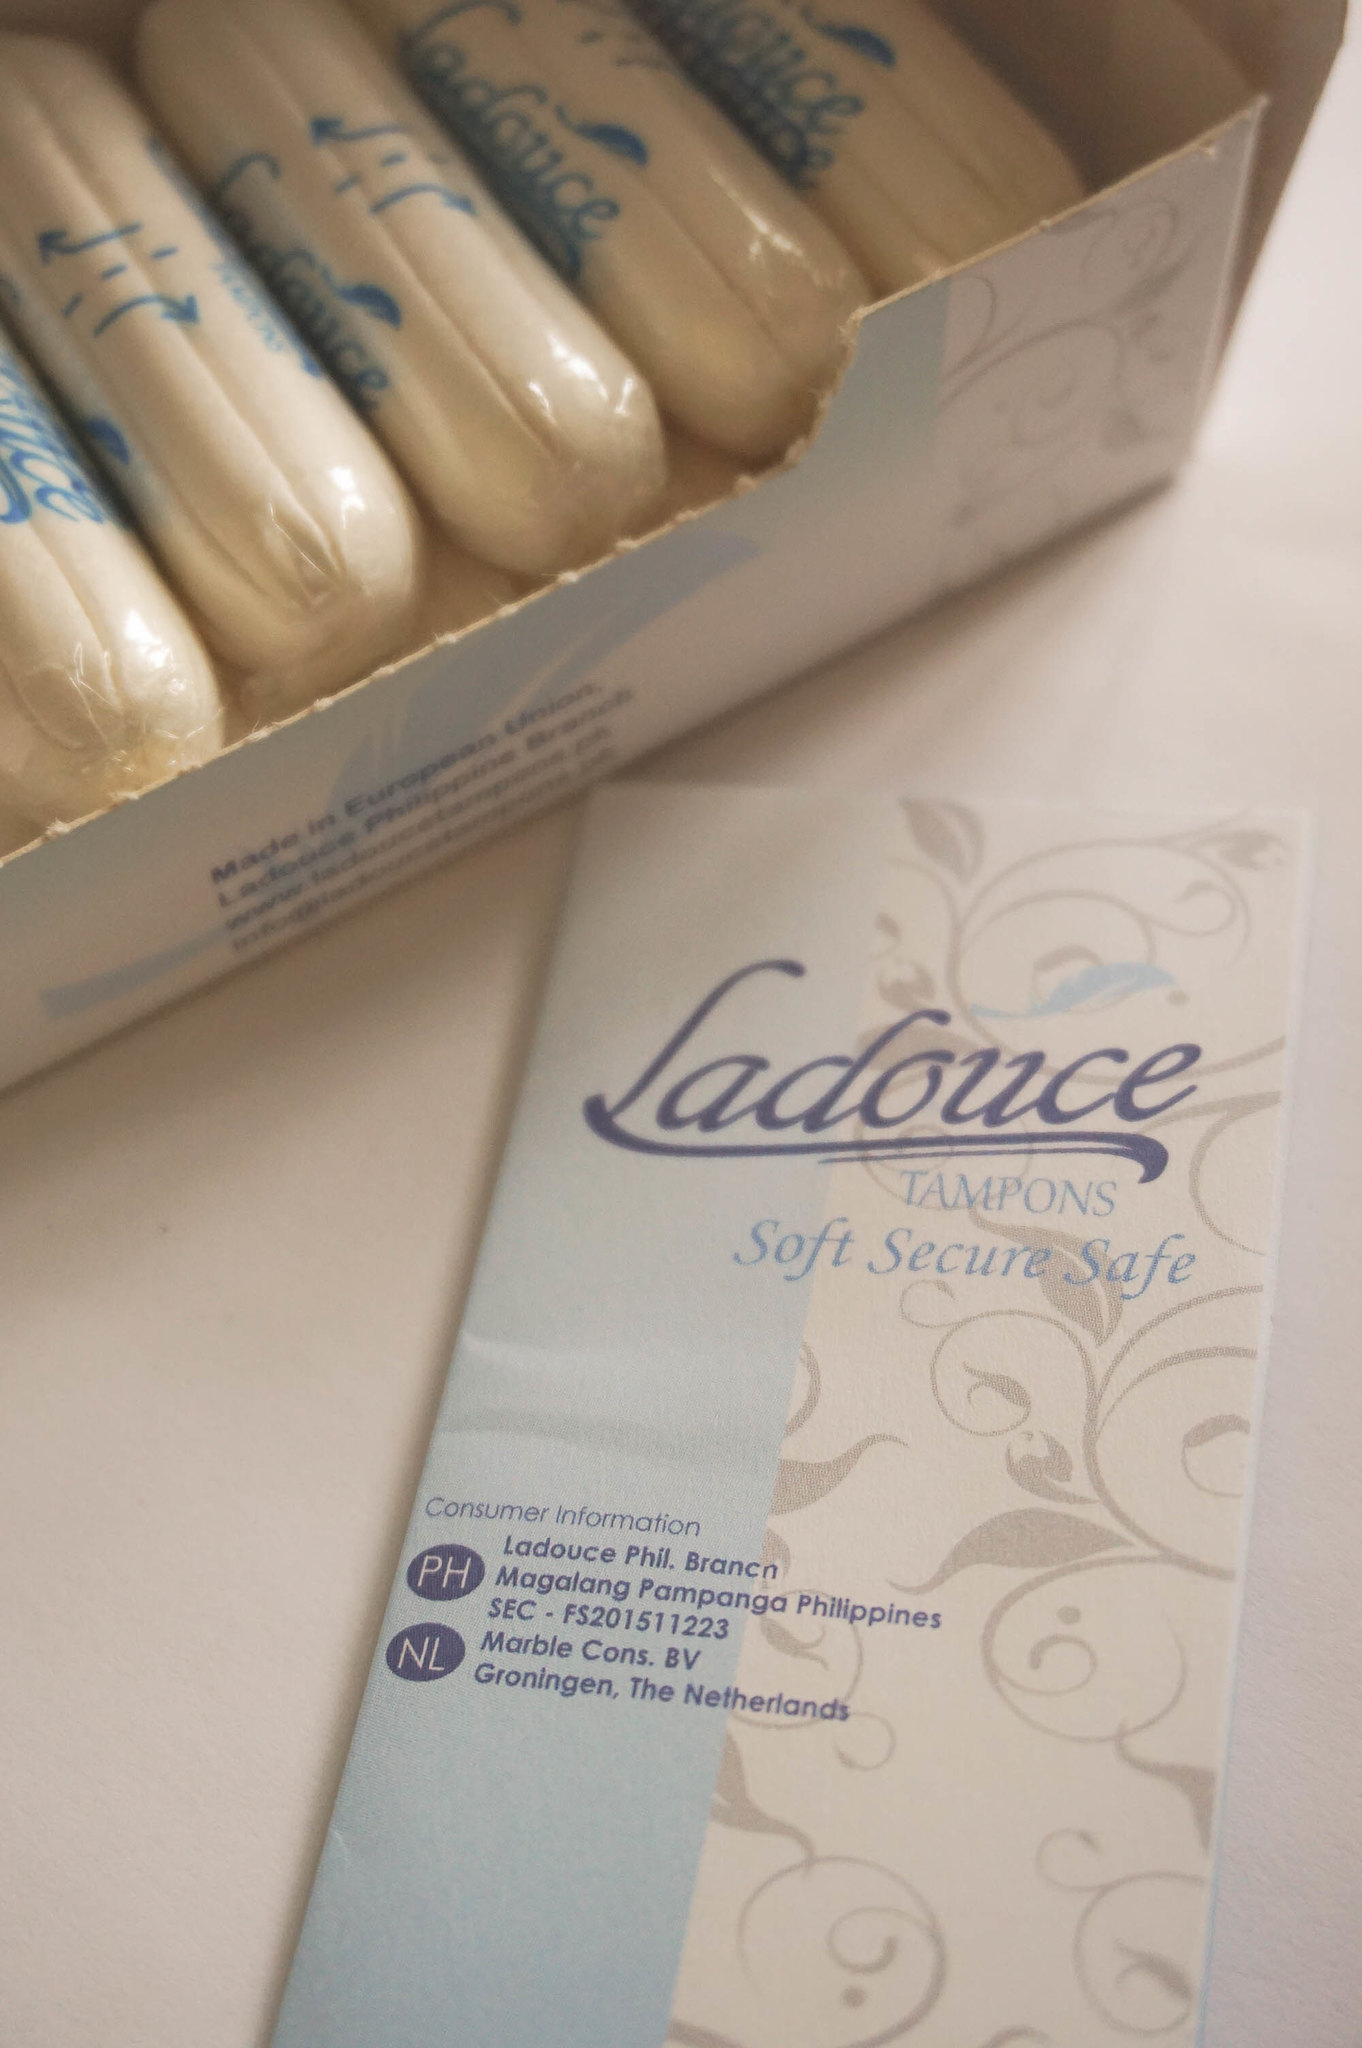 Ladouce Tampons hey its chel review